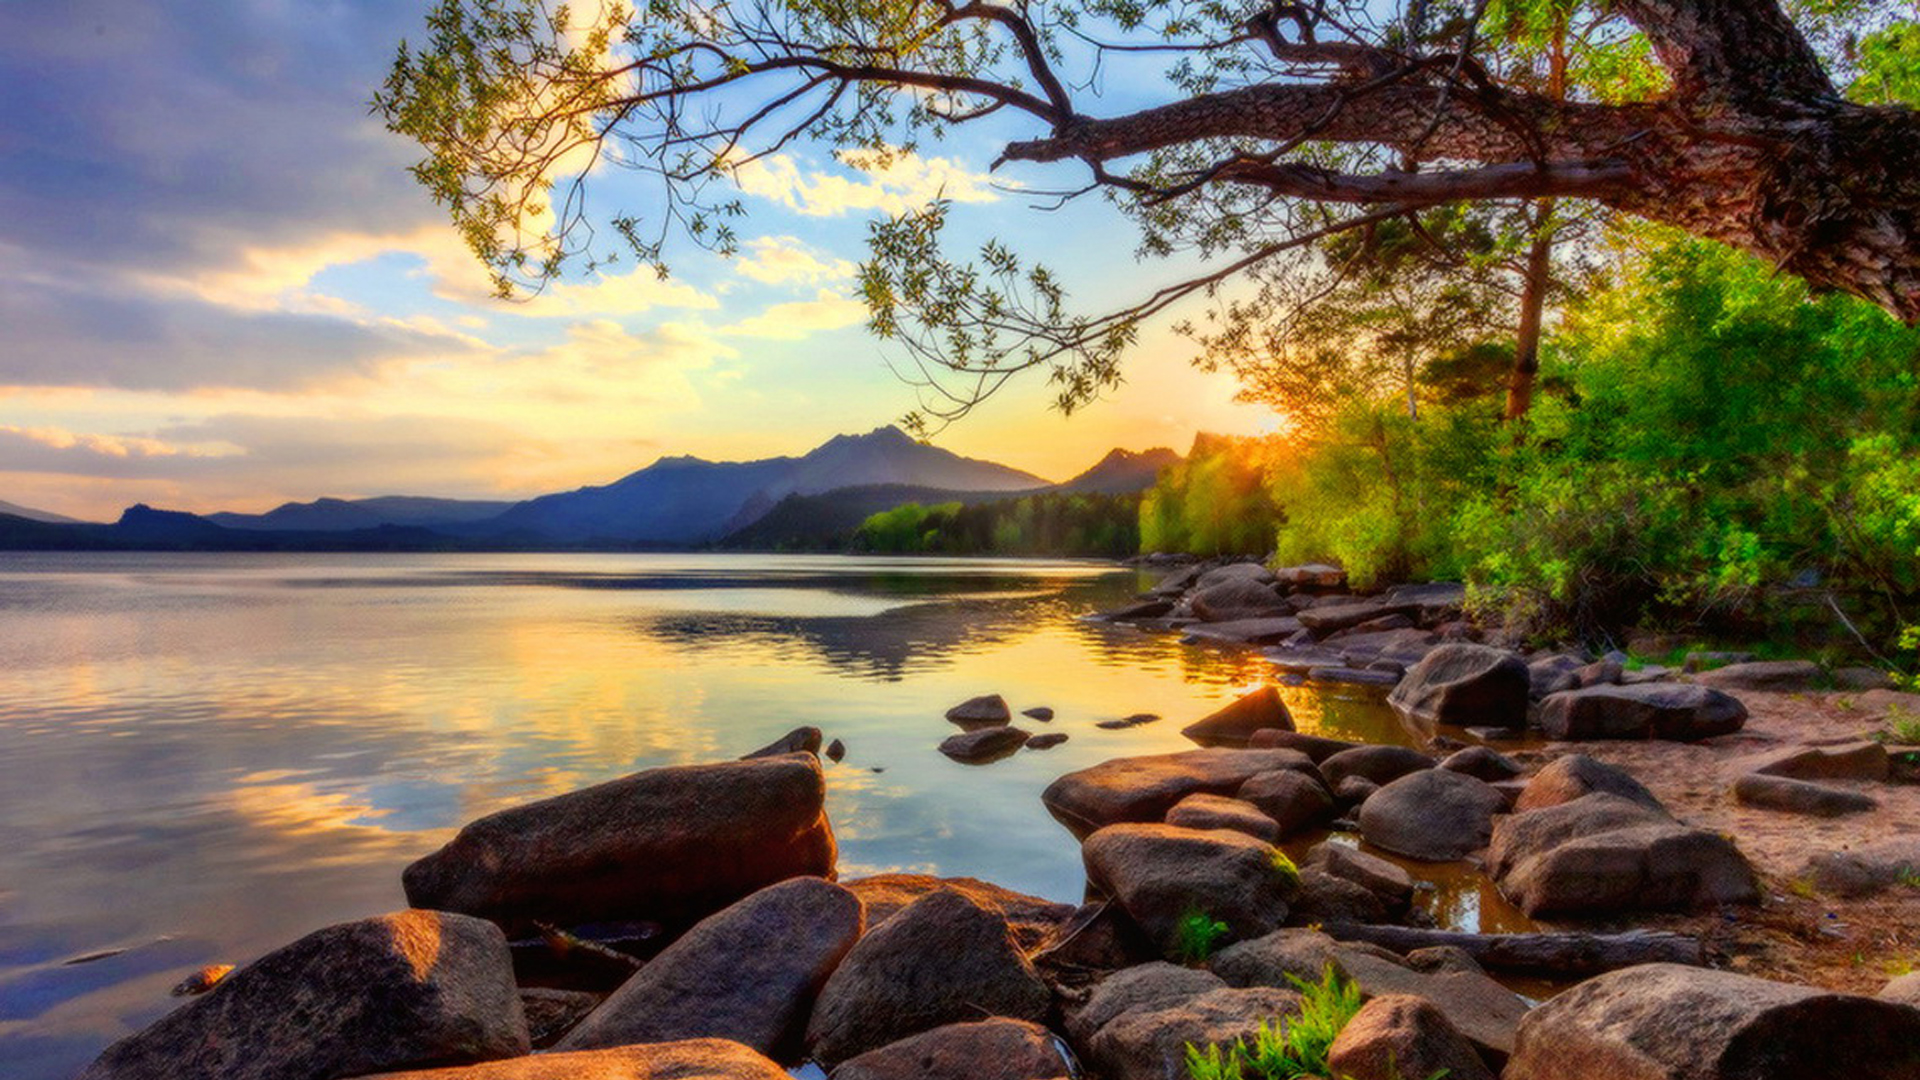 Closeup View Of Stones On Water Green Trees Bushes Plants Landscape View Of Mountains During Sunset HD Nature